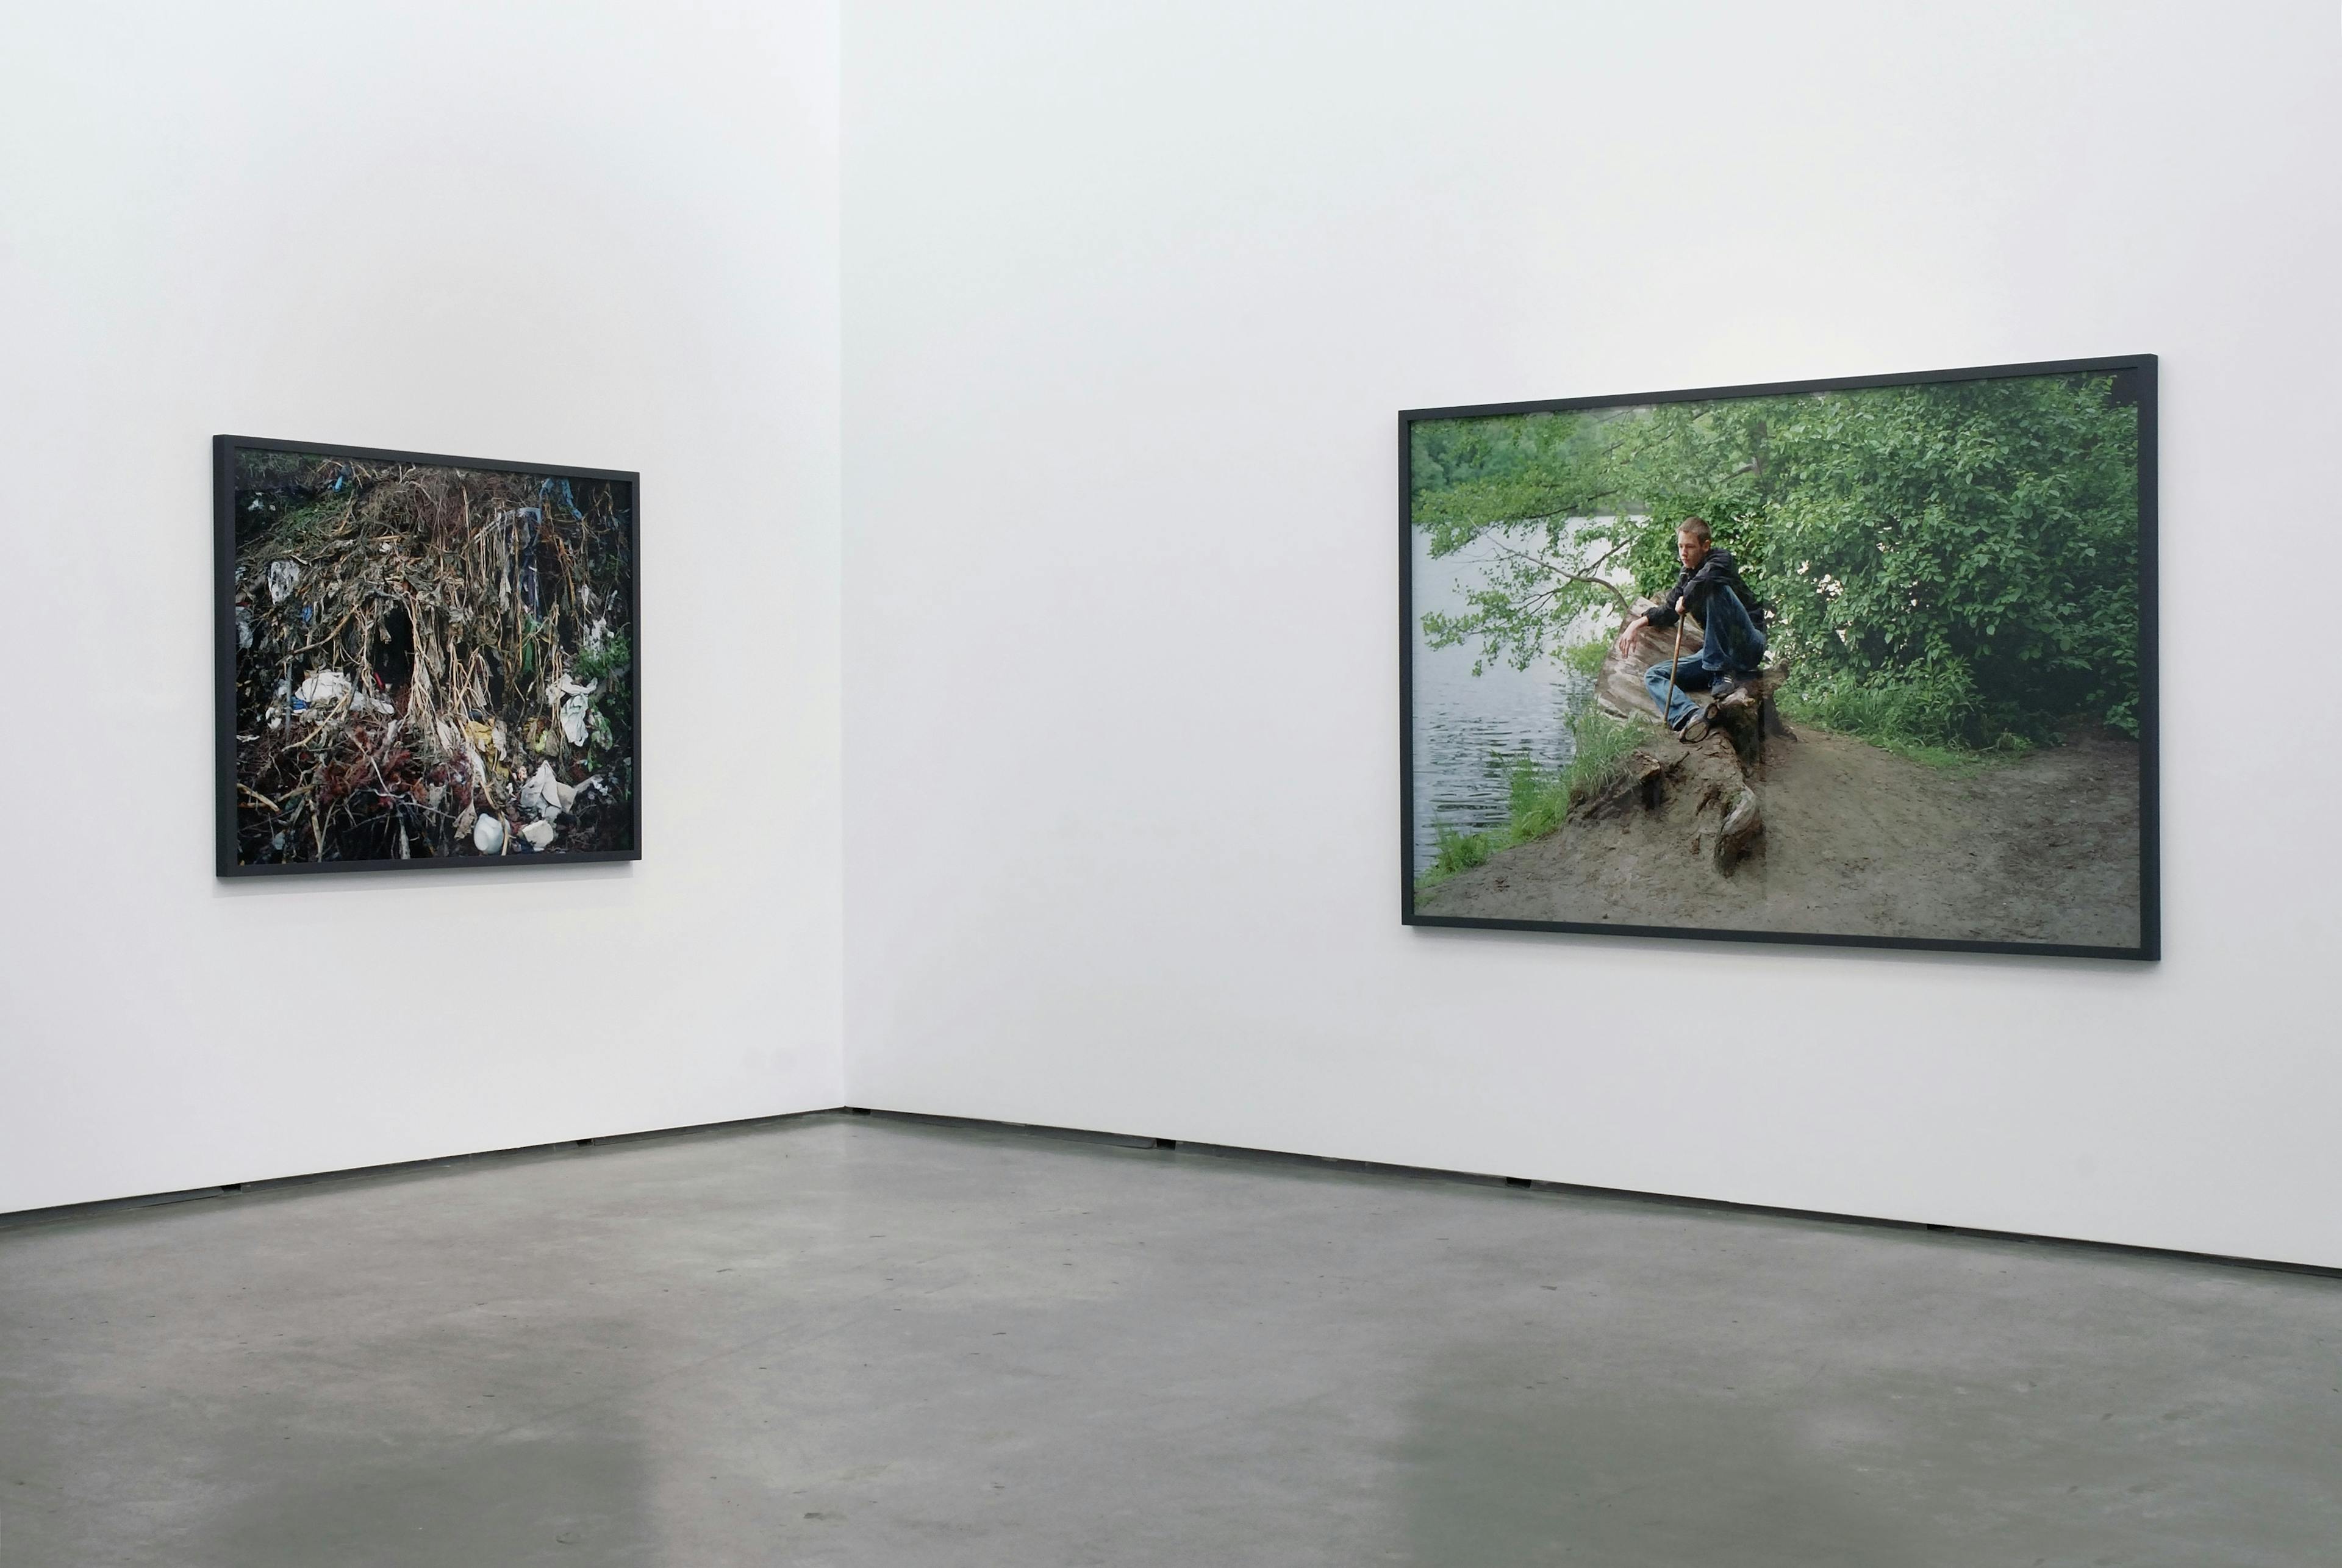 Two large scale framed photographs hang on adjacent corner walls in the gallery. One depicts tree roots covered in litter and the other a figure sitting on a tree stump near a body of water.